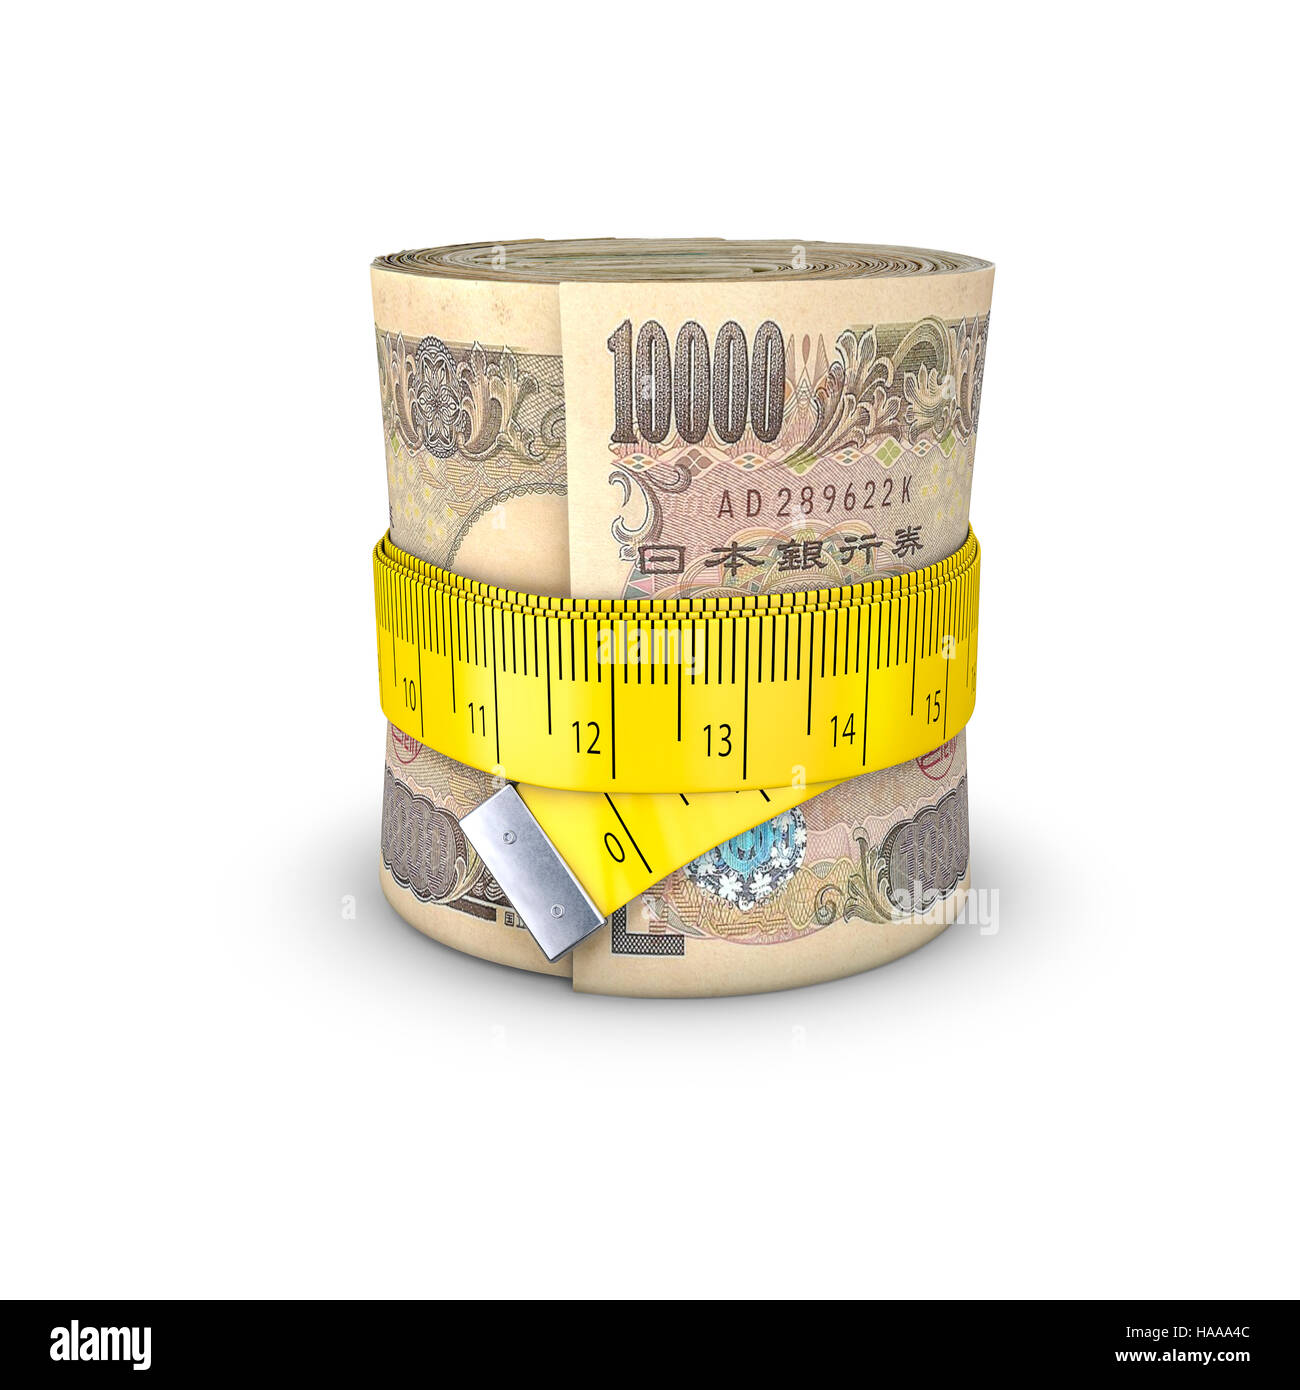 Tape measure yen / 3D illustration of measuring tape tightening around roll of bank notes Stock Photo